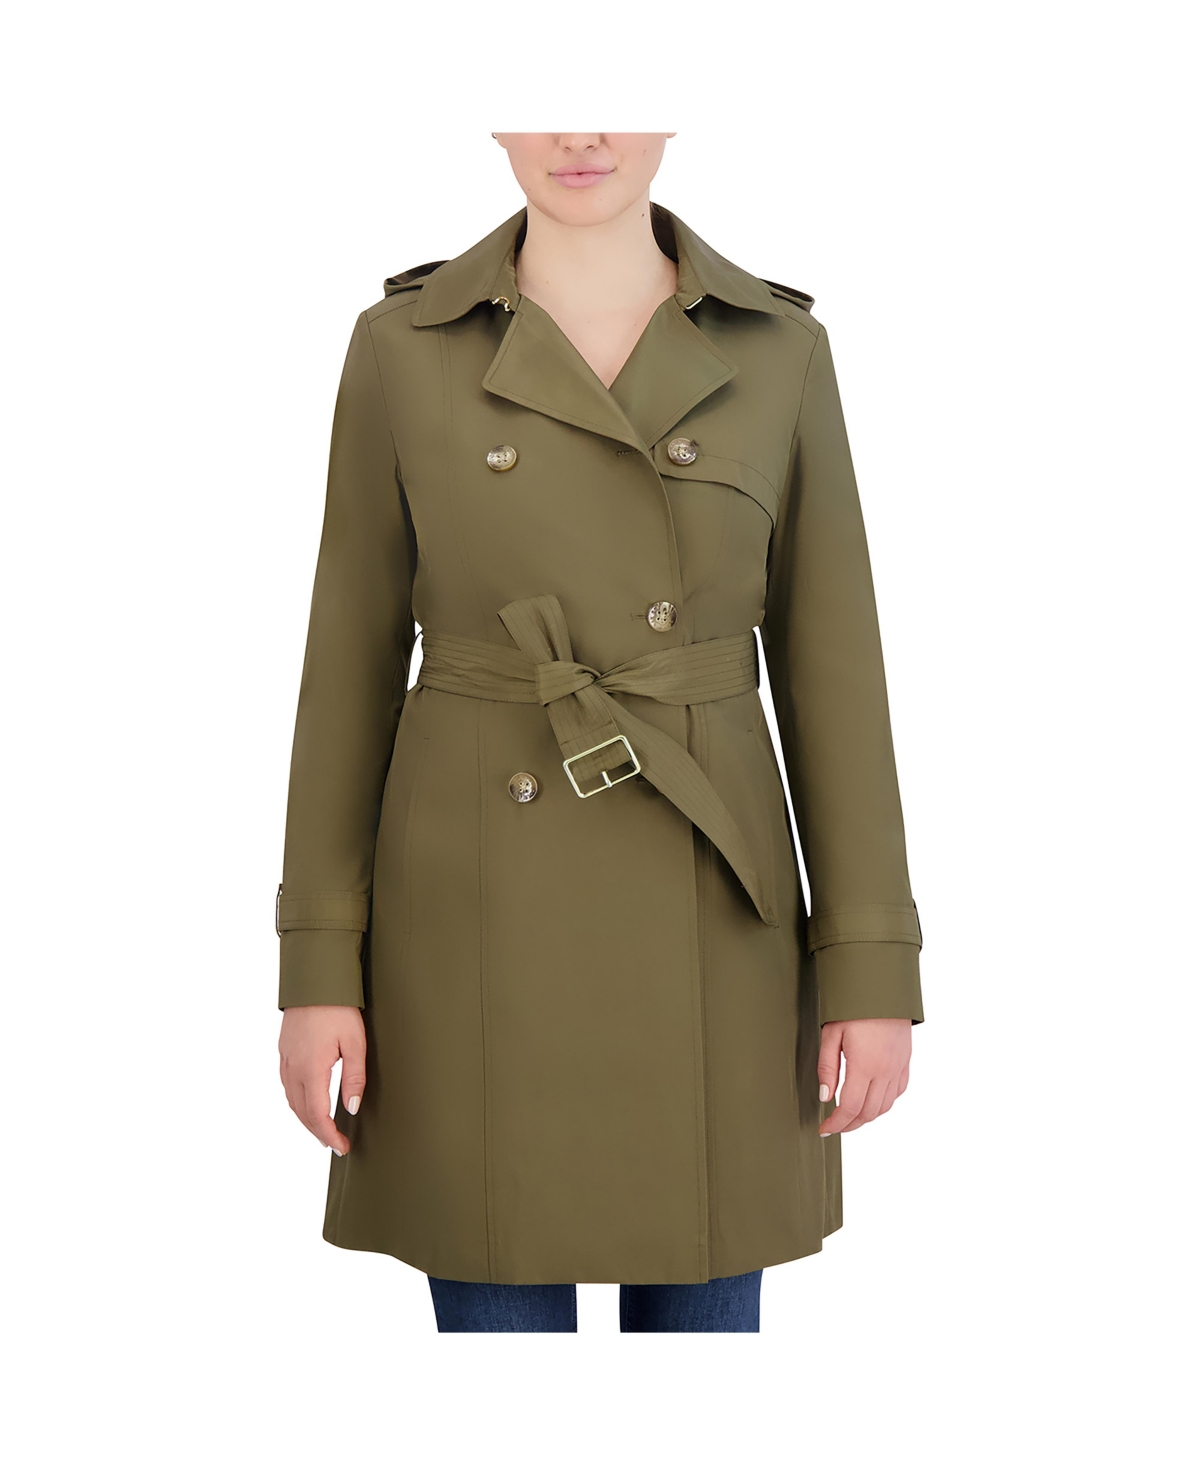 Women's Trench Coat - Army green